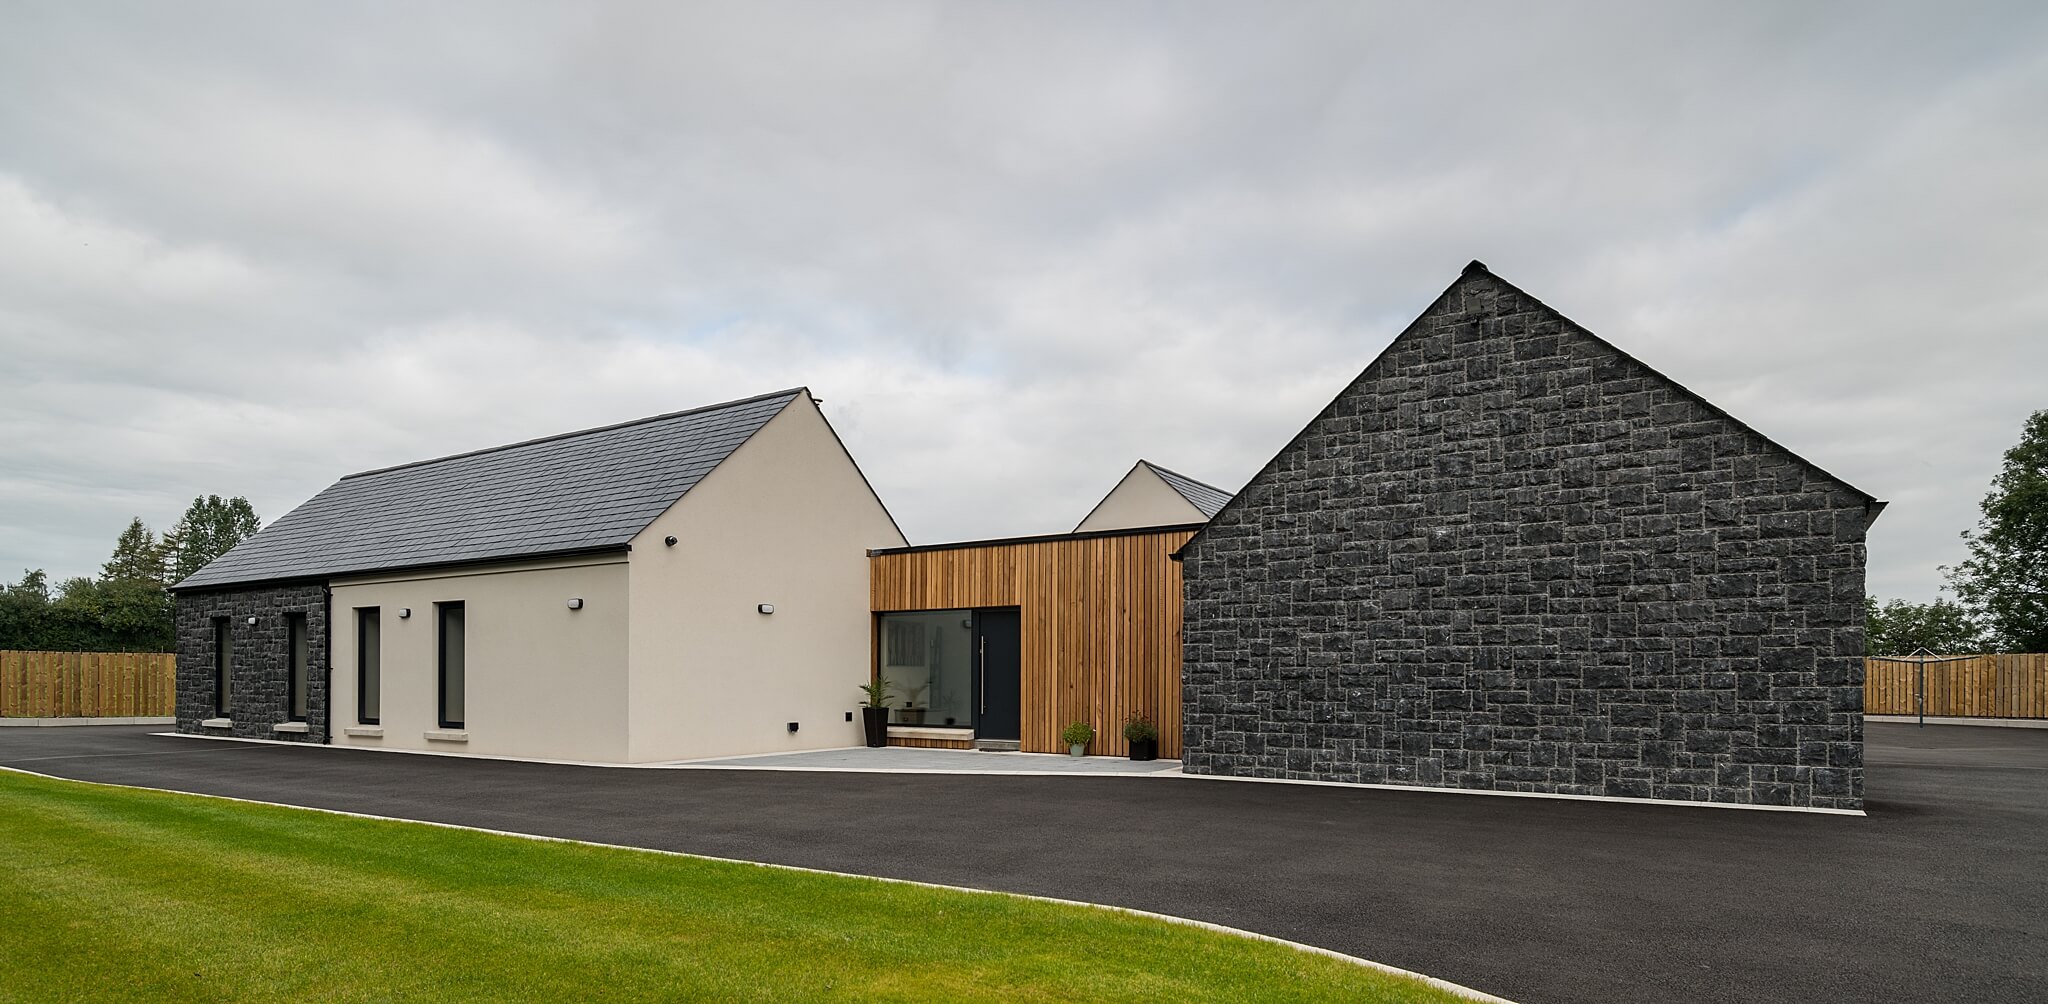 modern house frontage with timber cladding and stone walls